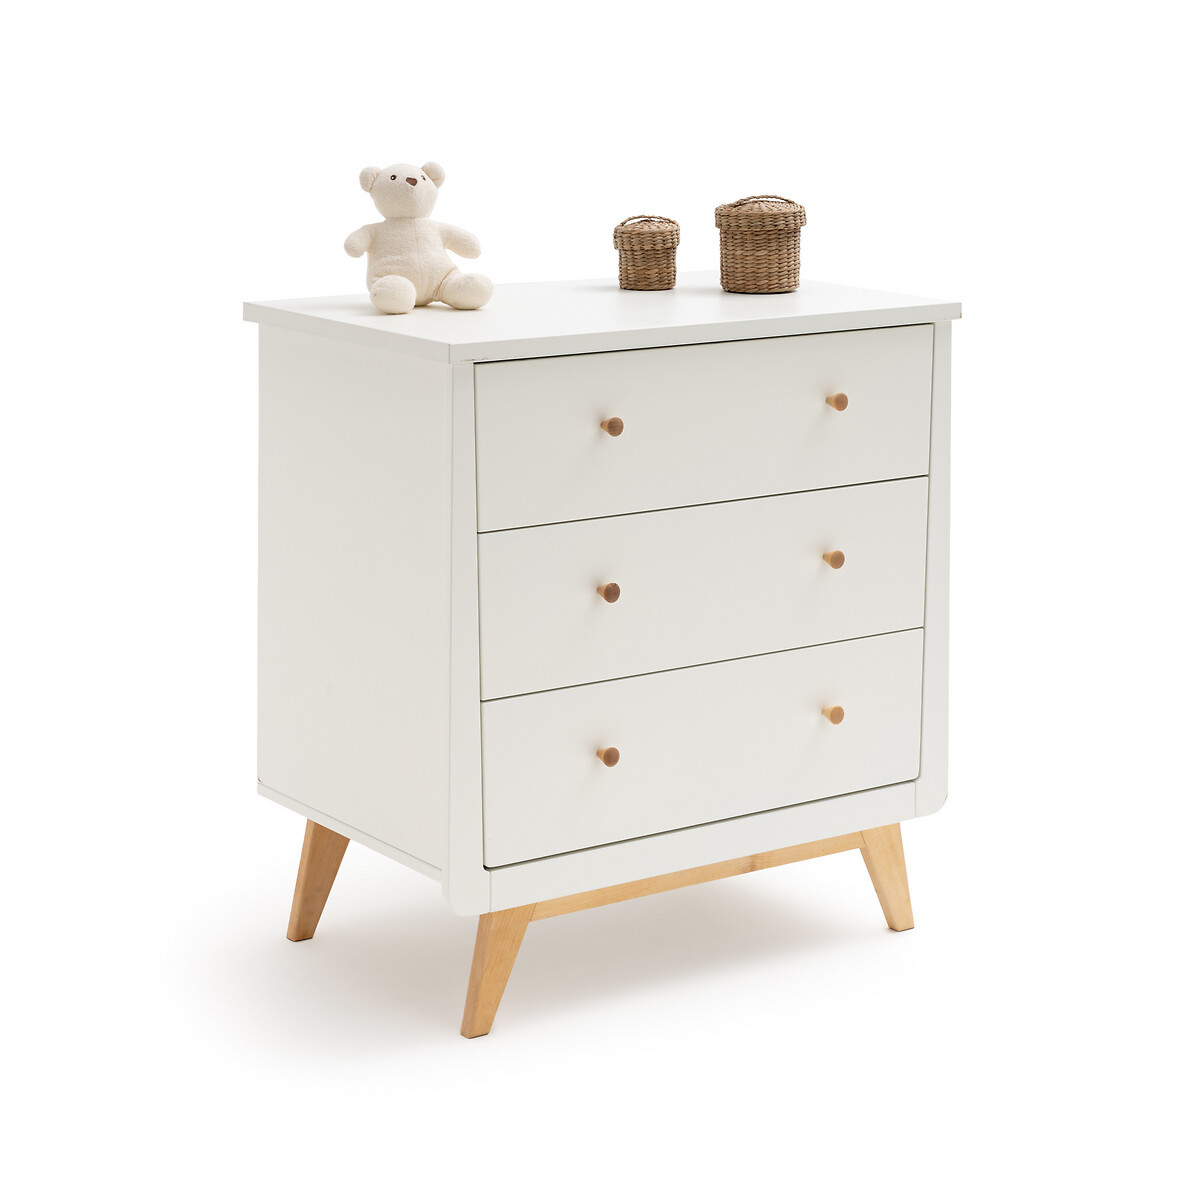 Willox Changing Table with 3 Drawers